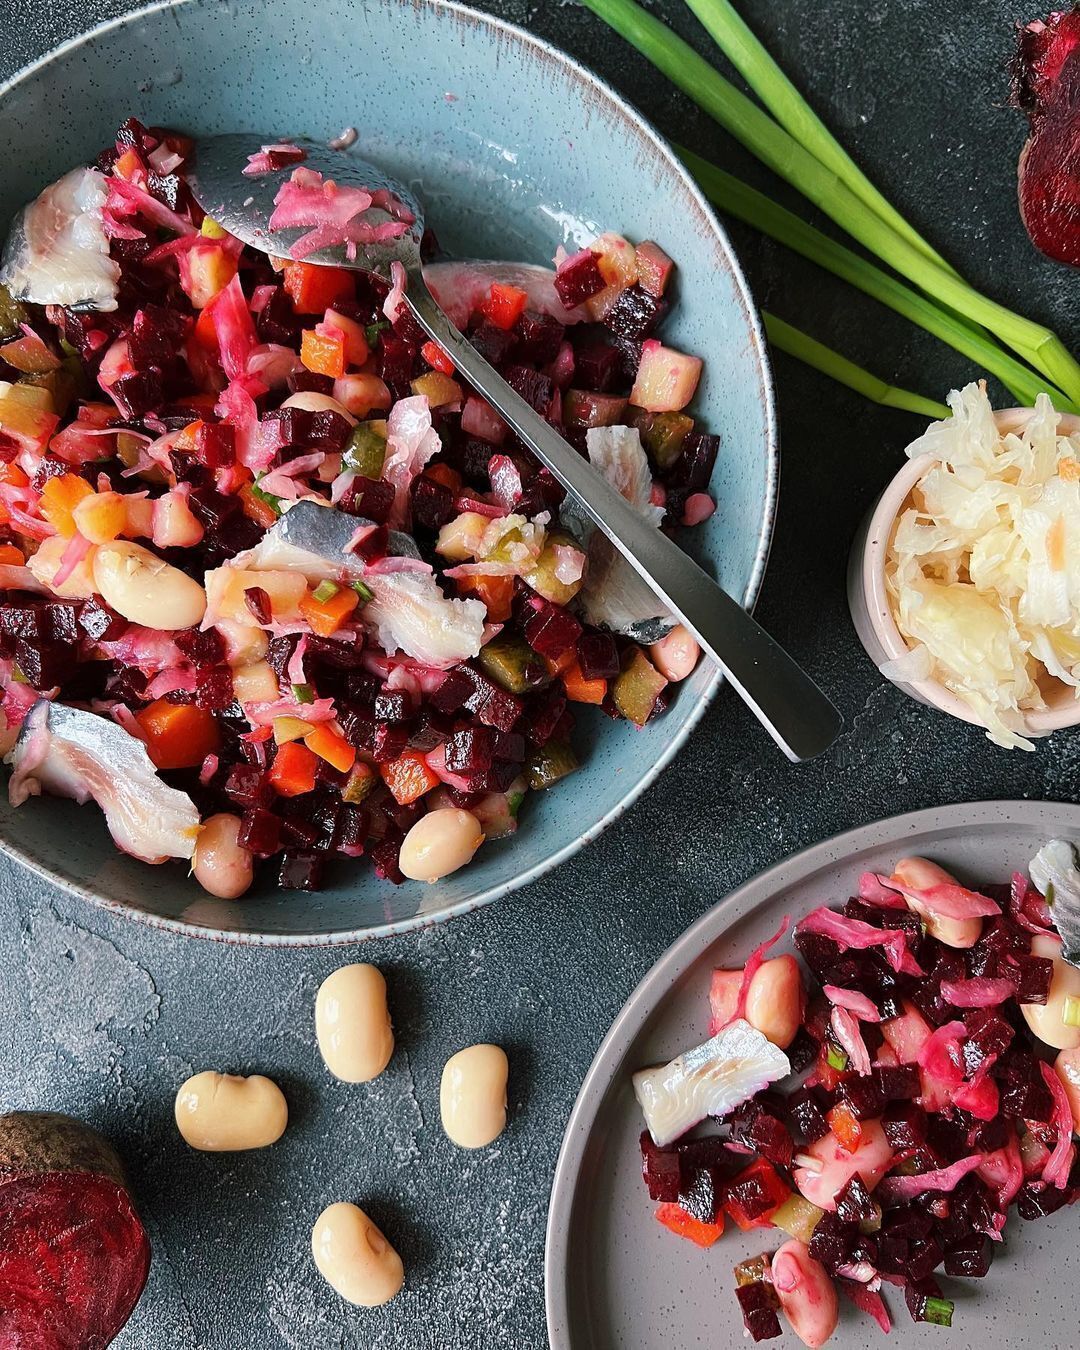 Salad with beets and herring without mayonnaise